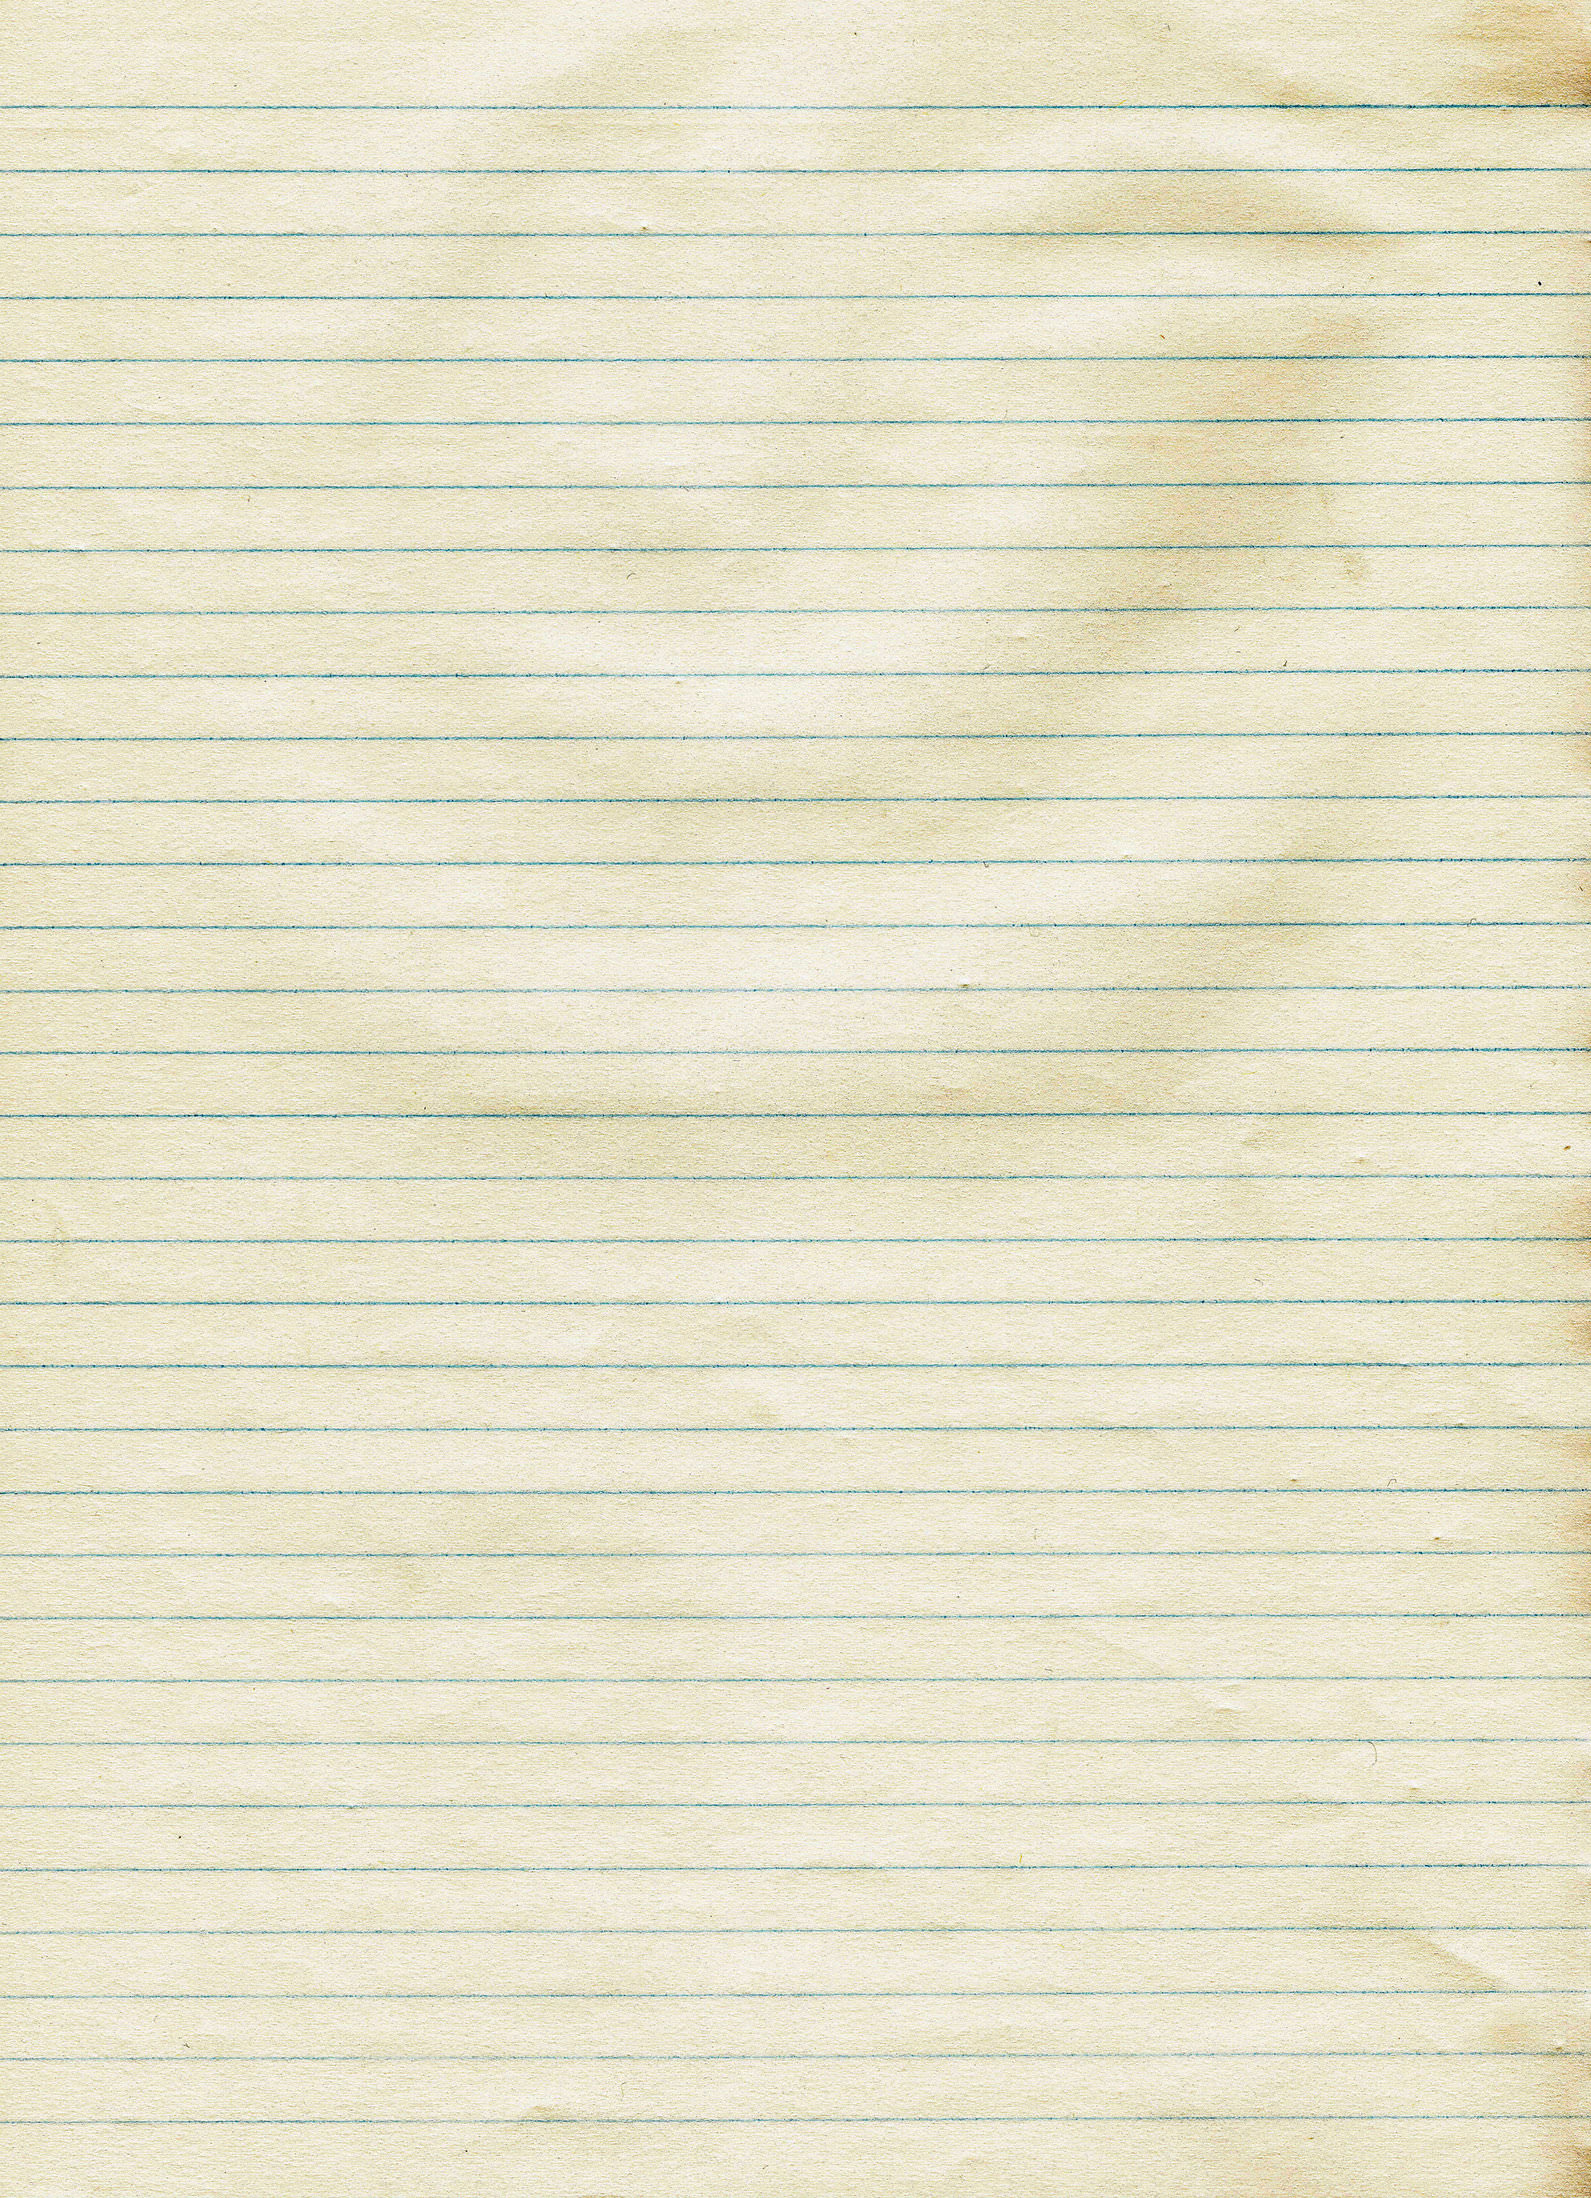 Paper grid texture background